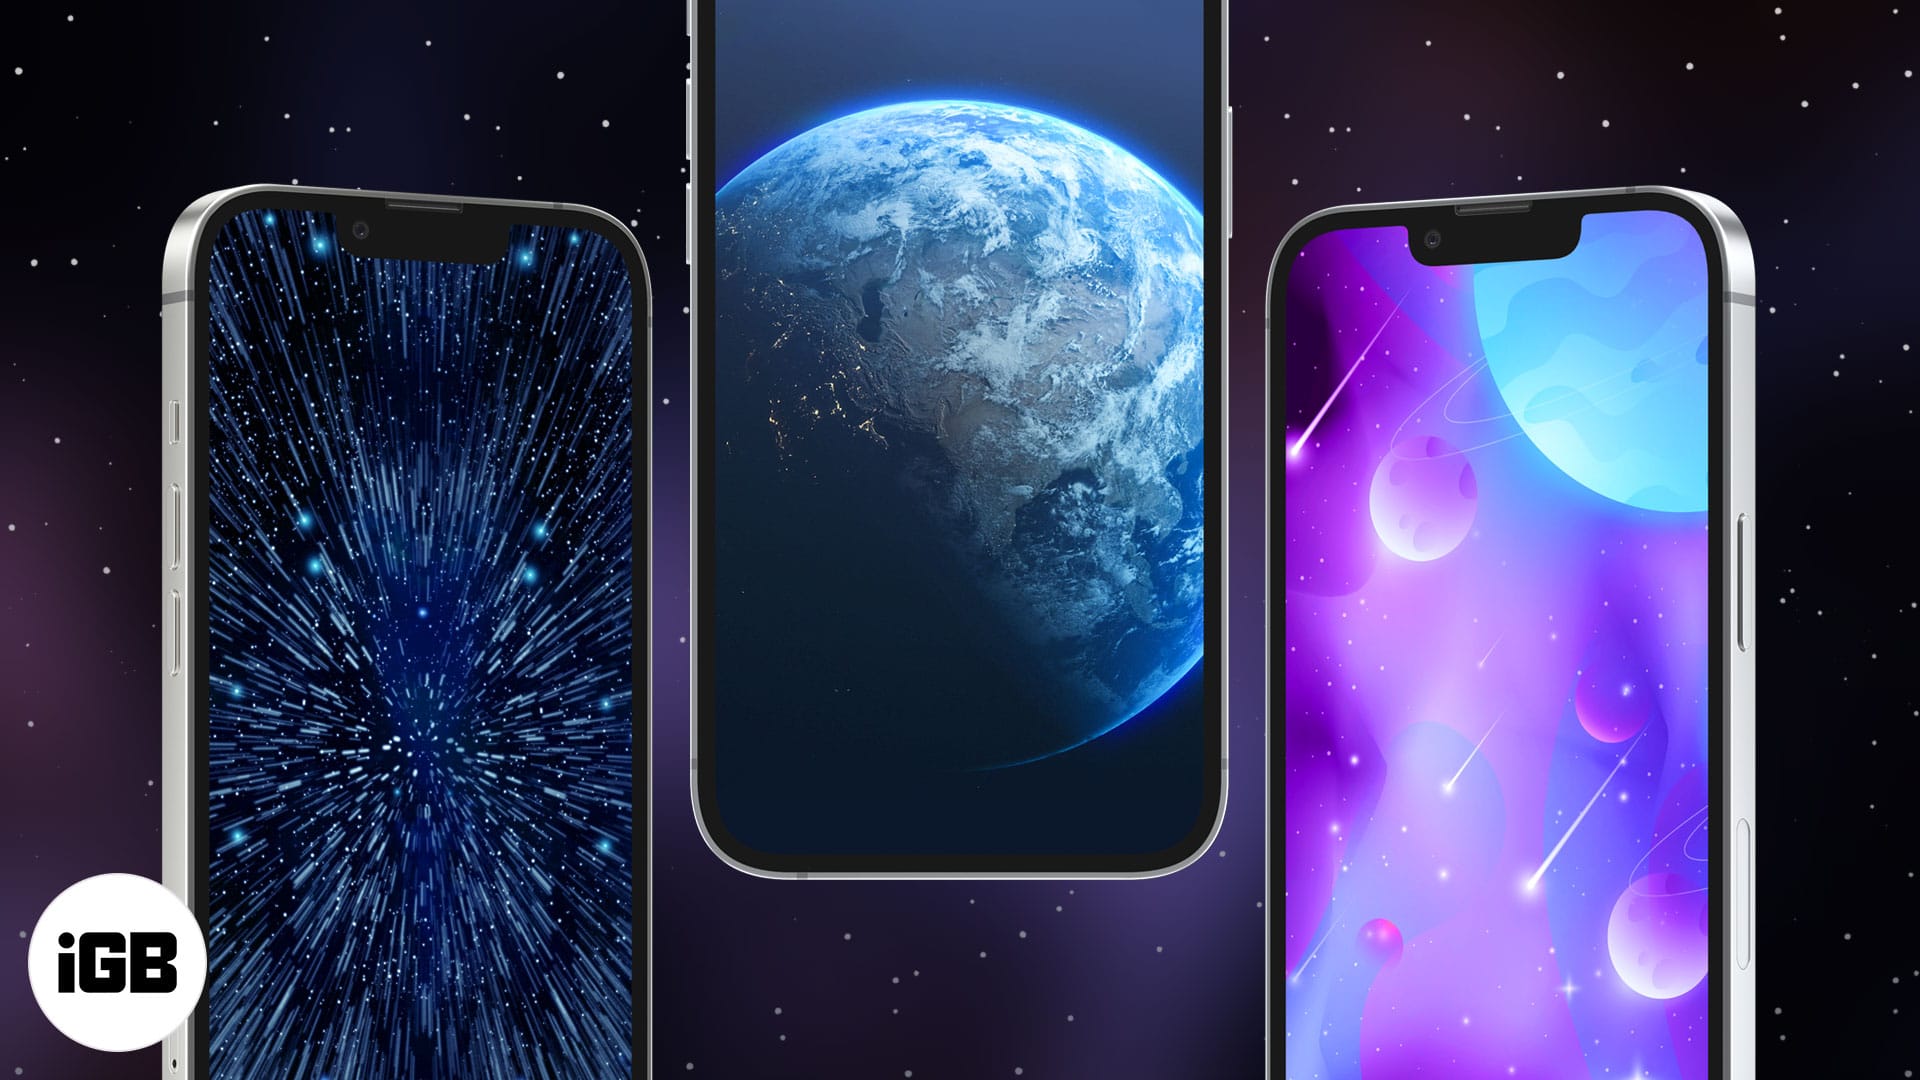 8 Spectacular space wallpapers for iPhone (Free download) - iGeeksBlog